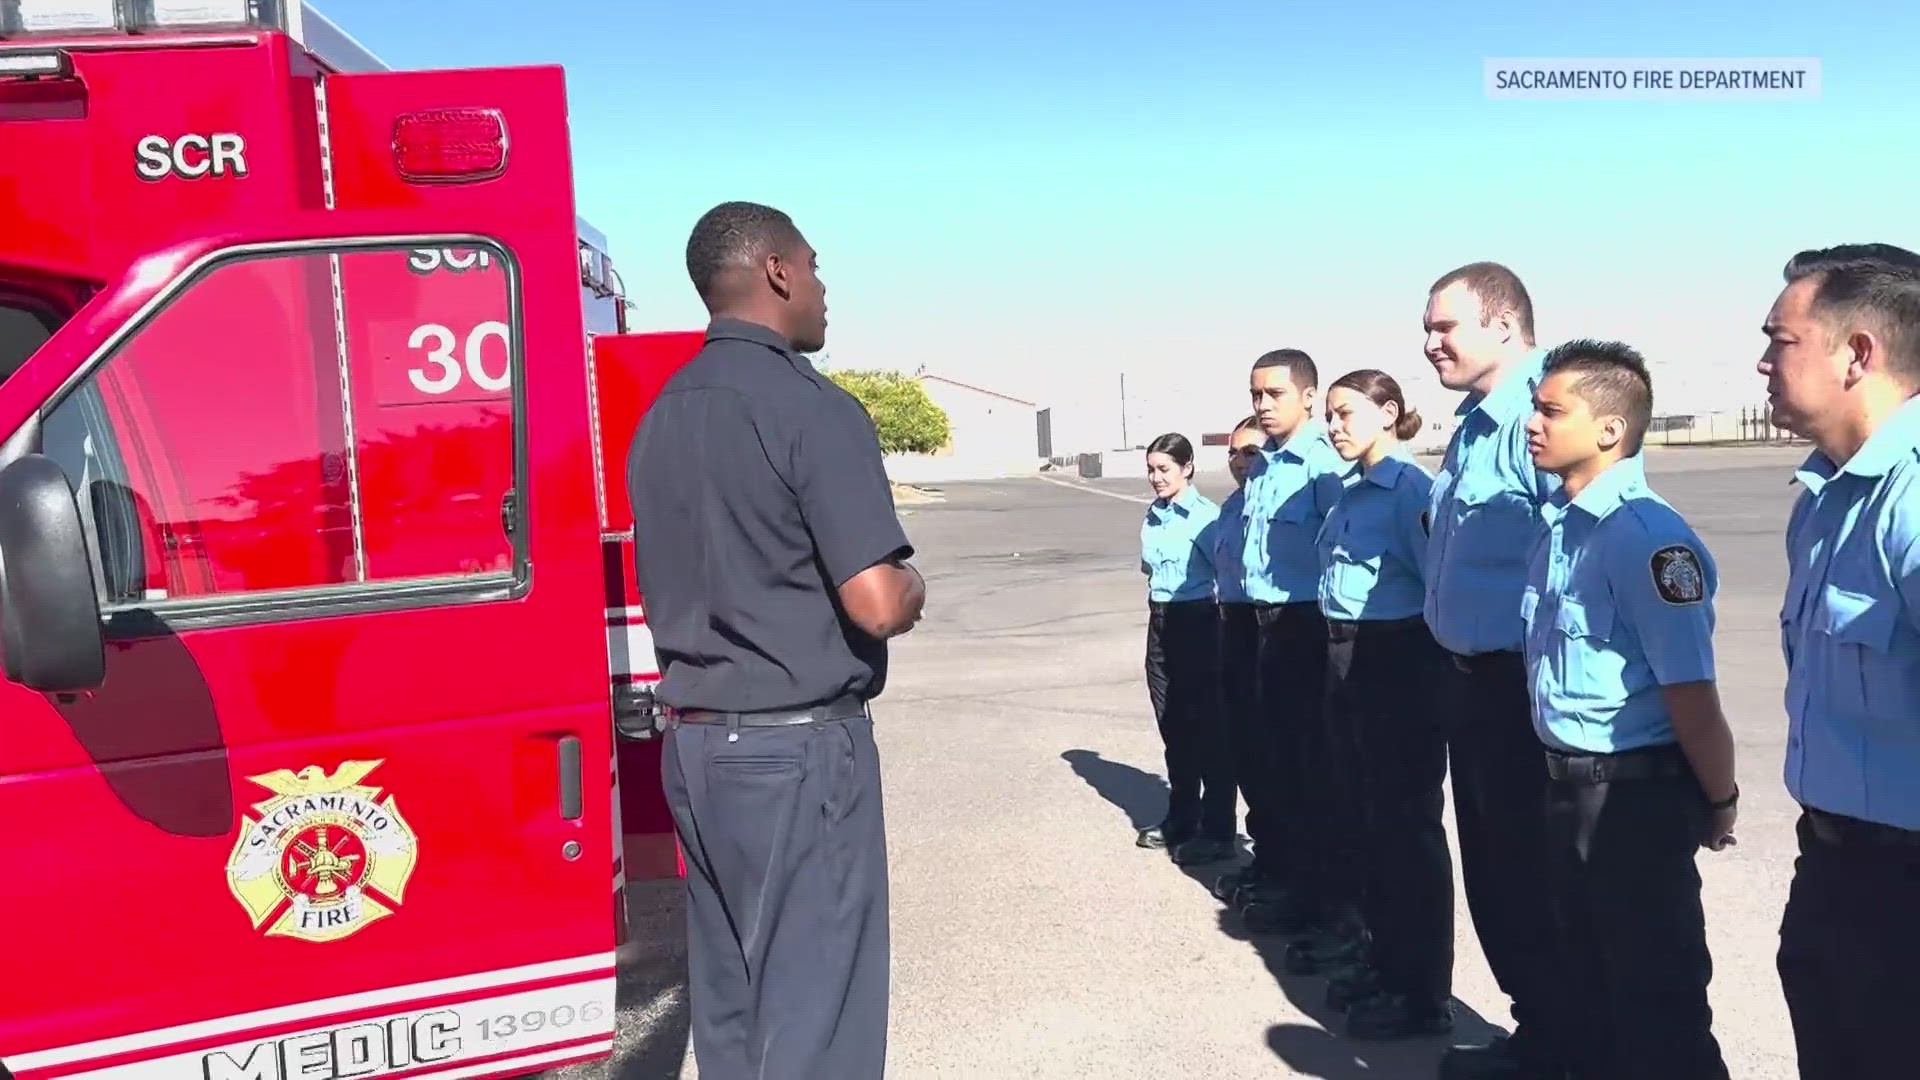 Sacramento Fire Department launched a new EMS Trainee program encouraging diversity